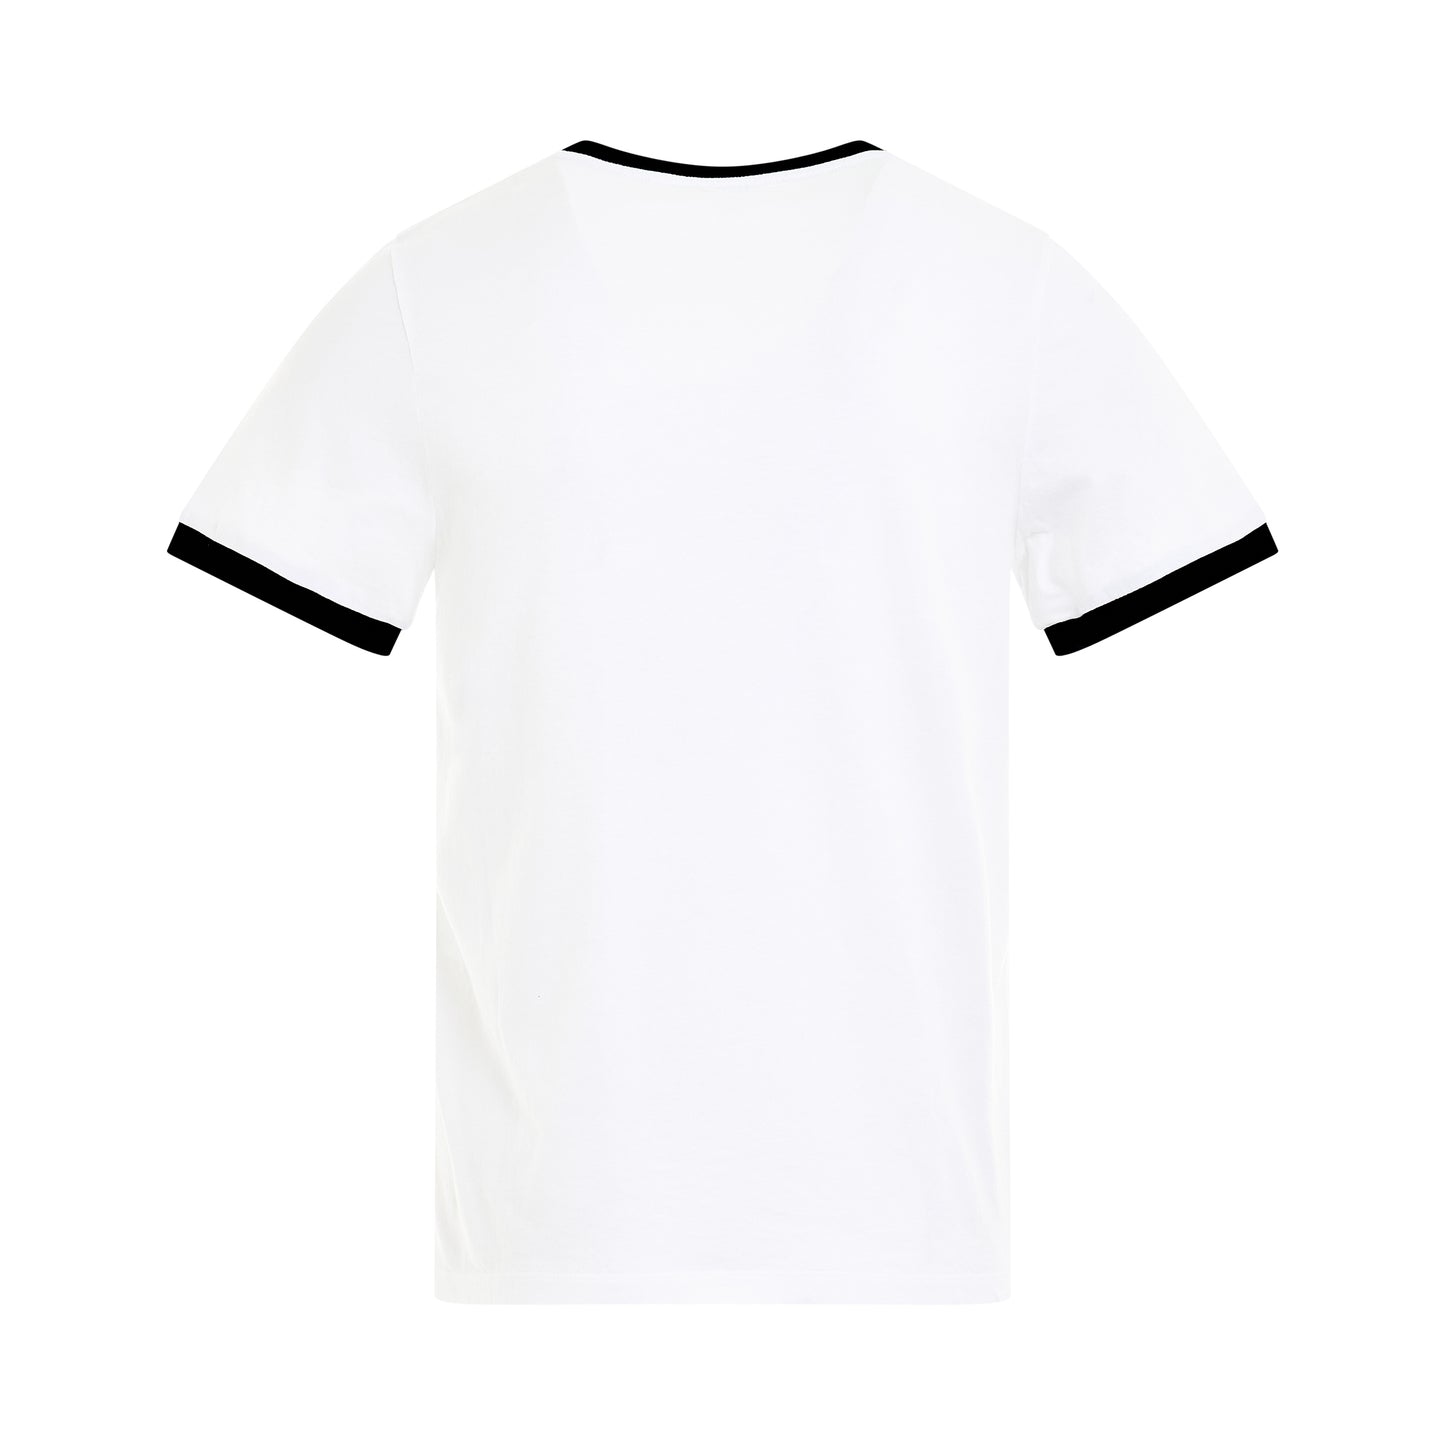 Anagram Contrast T-Shirt in White/Black